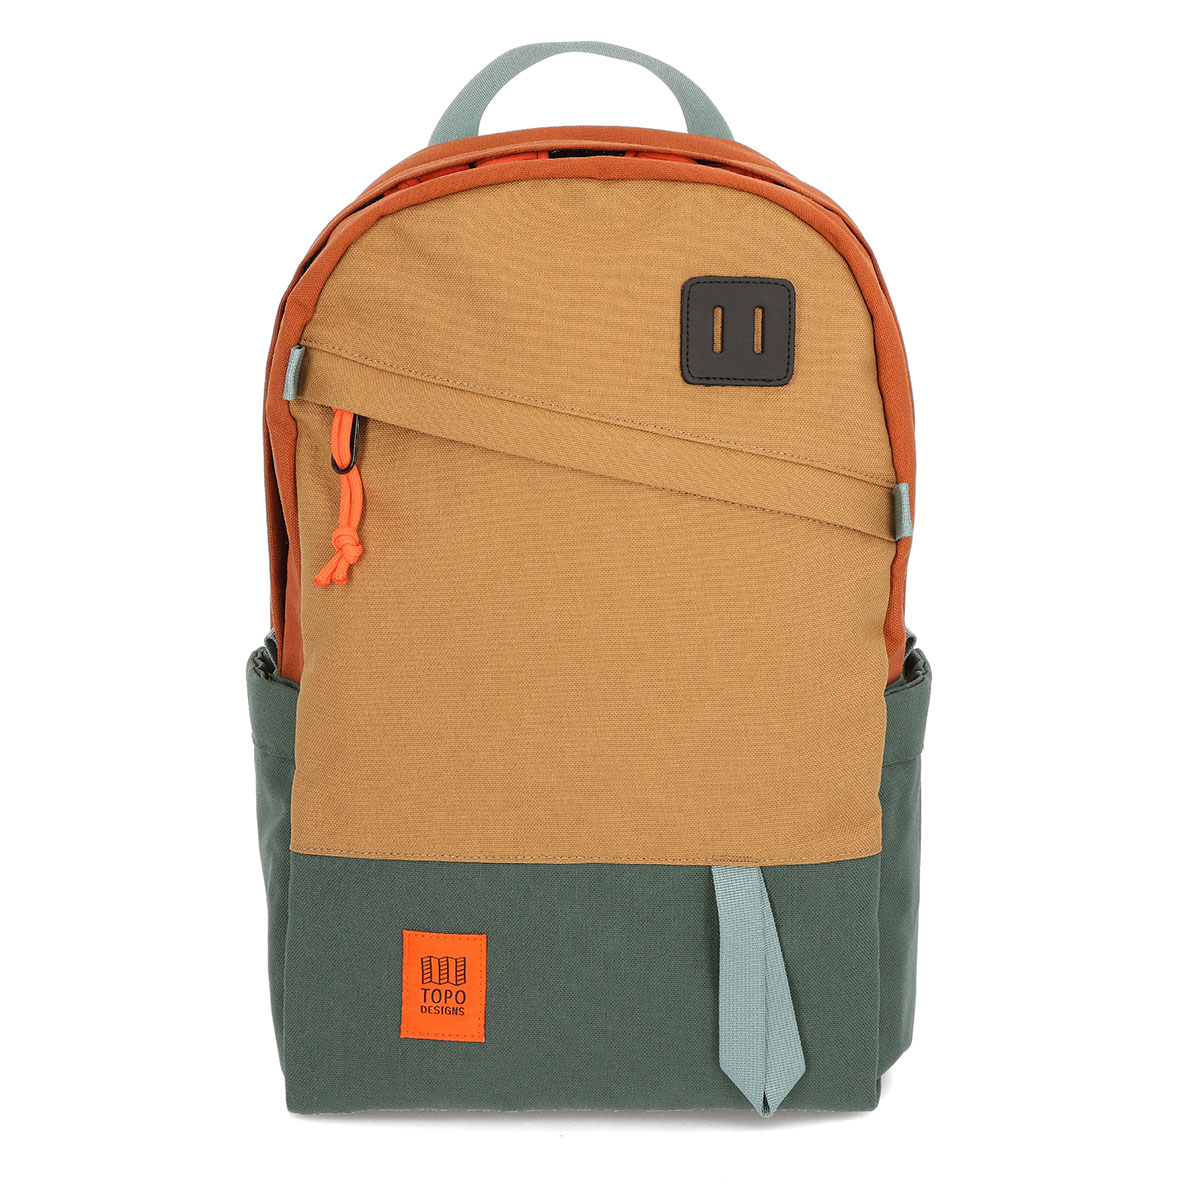 Topo Designs Daypack Classic Khaki/Forest/Clay, it’s great as an everyday work bag, yet it has enough room for extra layers on the trail